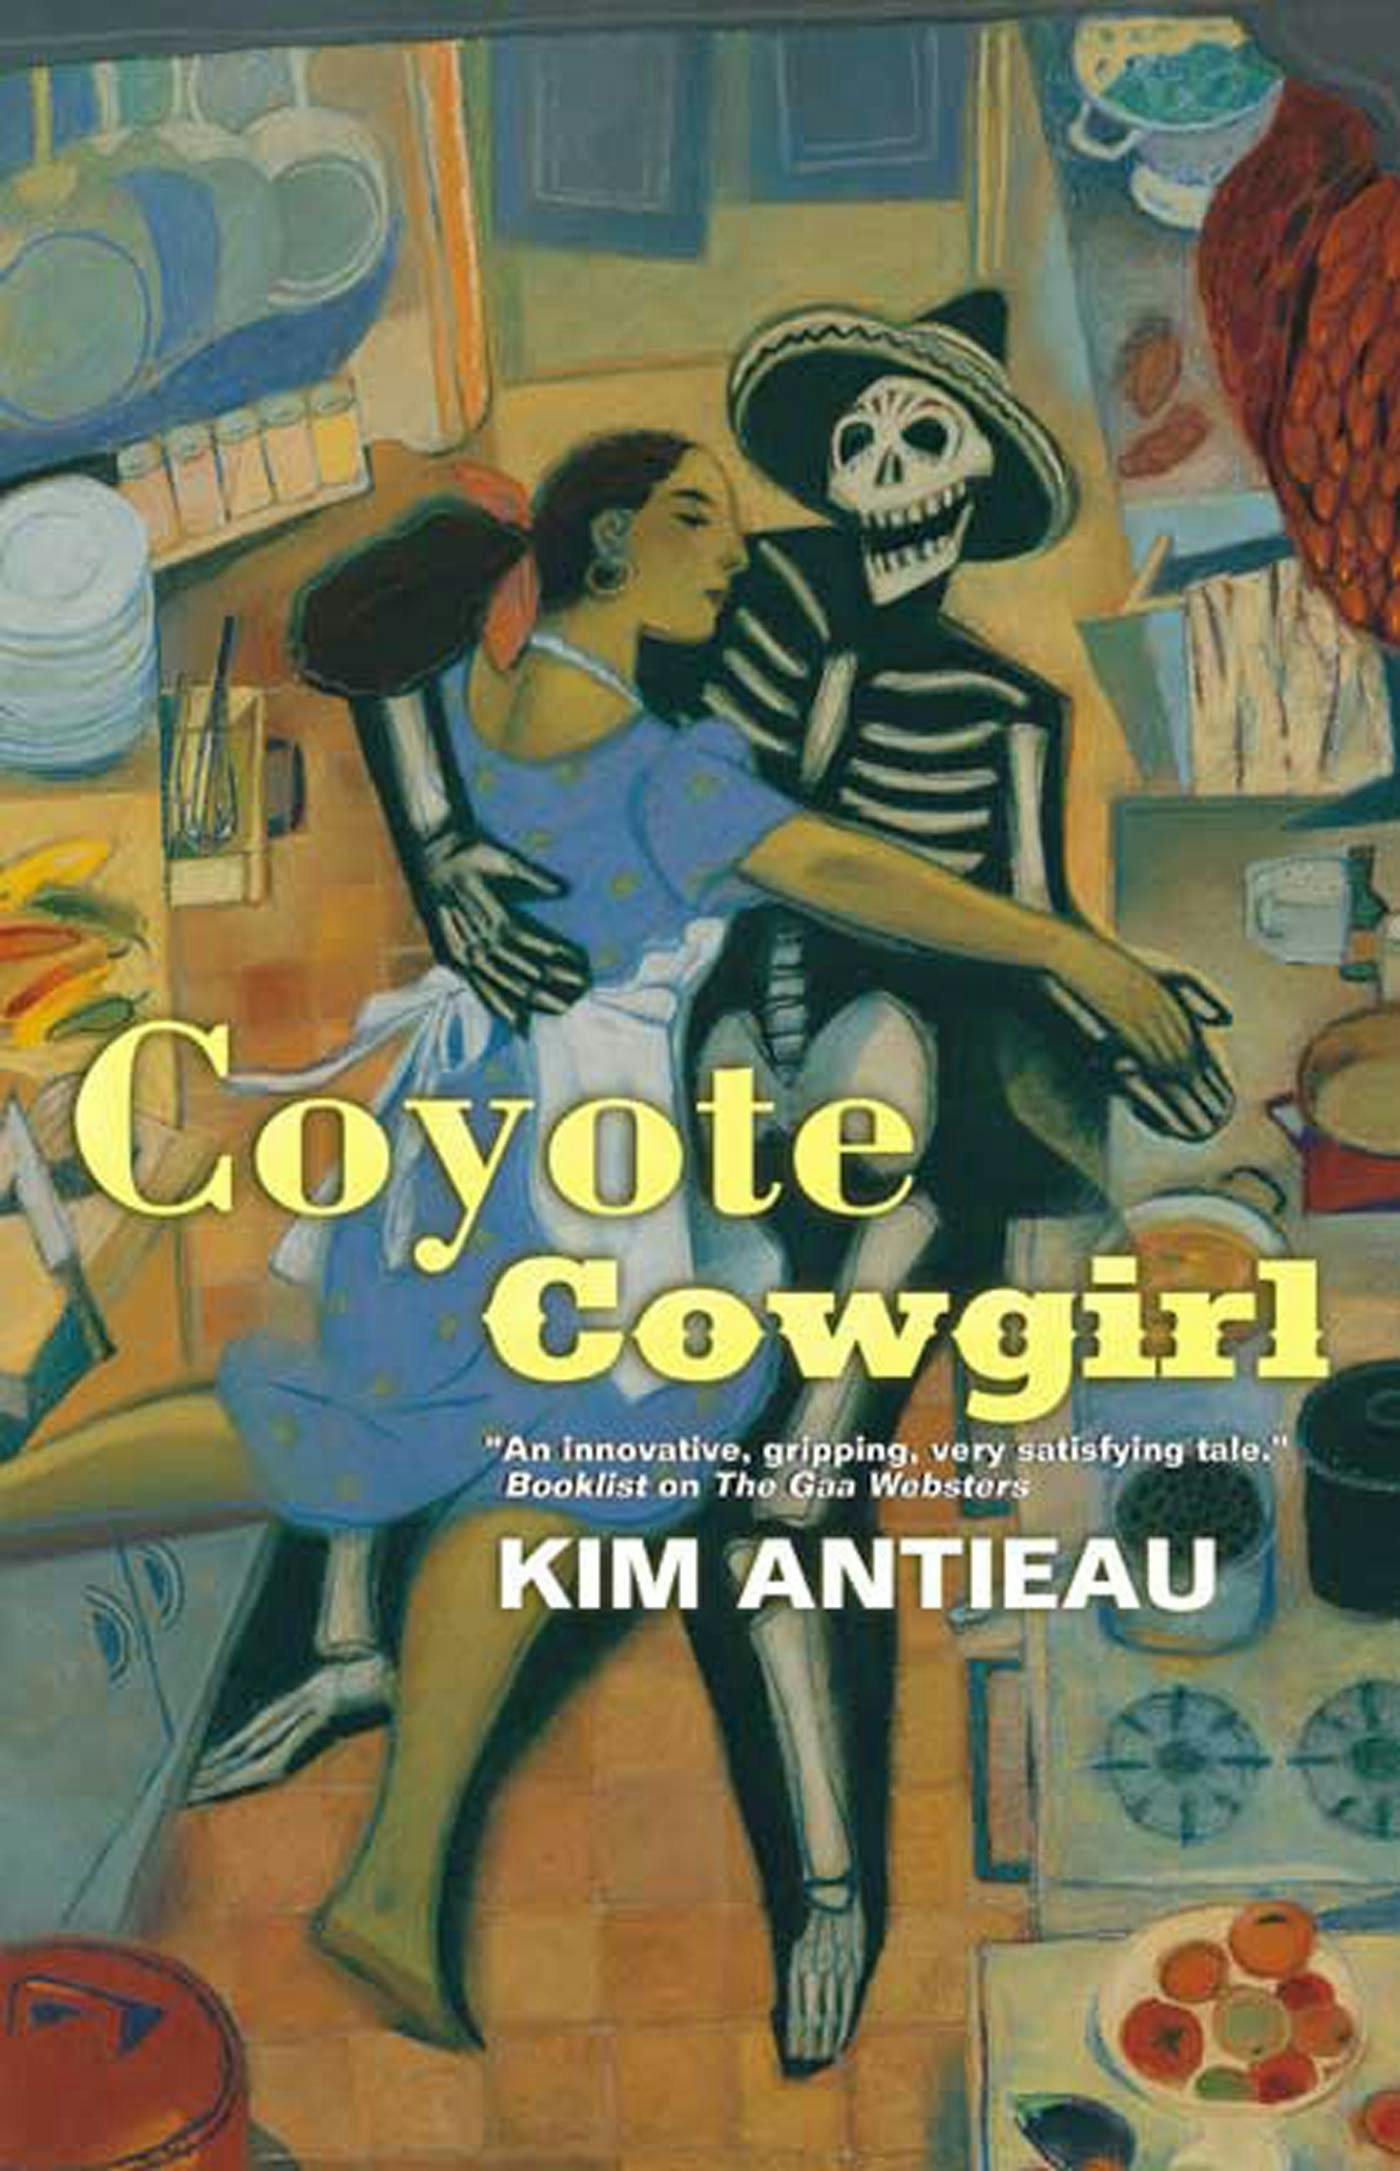 Cover for the book titled as: Coyote Cowgirl